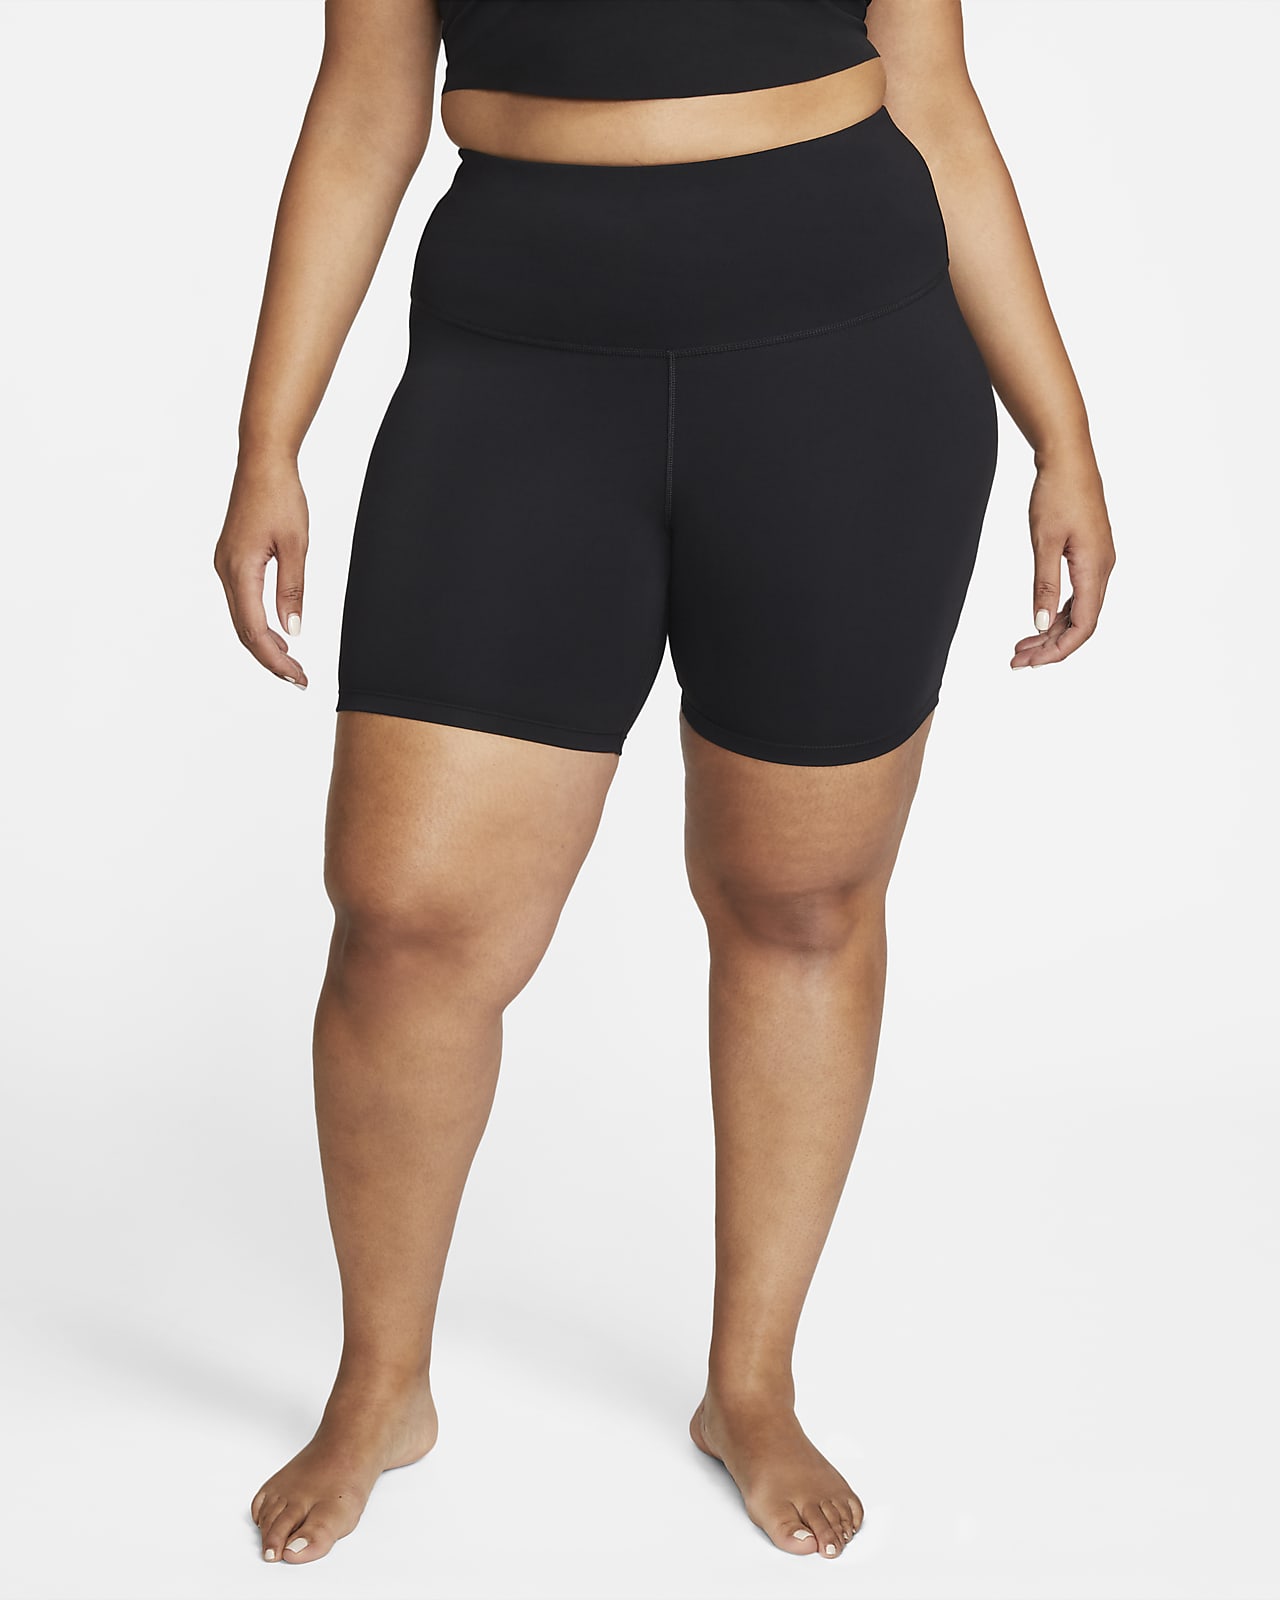 Nike Yoga Women's High-Waisted 18cm (approx.) Shorts (Plus Size)